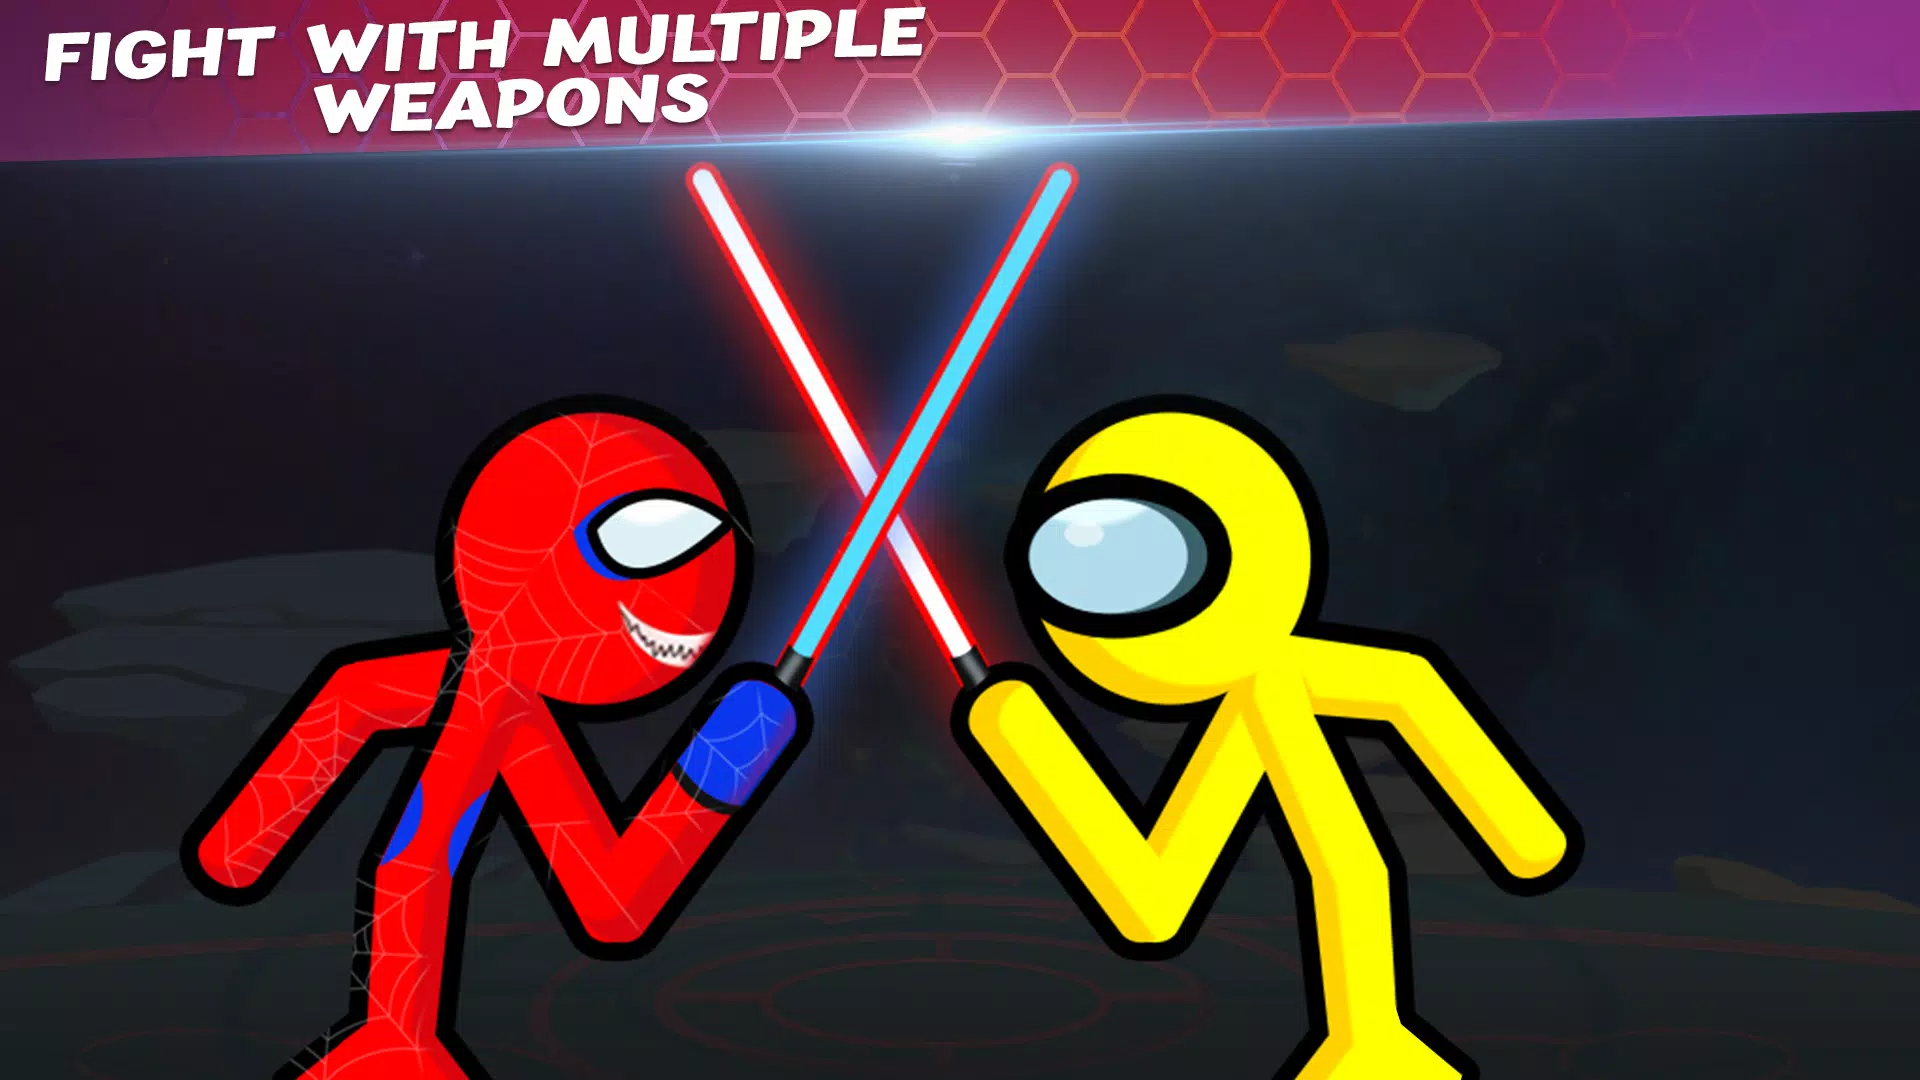 Super Stickman Fighting Battle Game for Android - Download